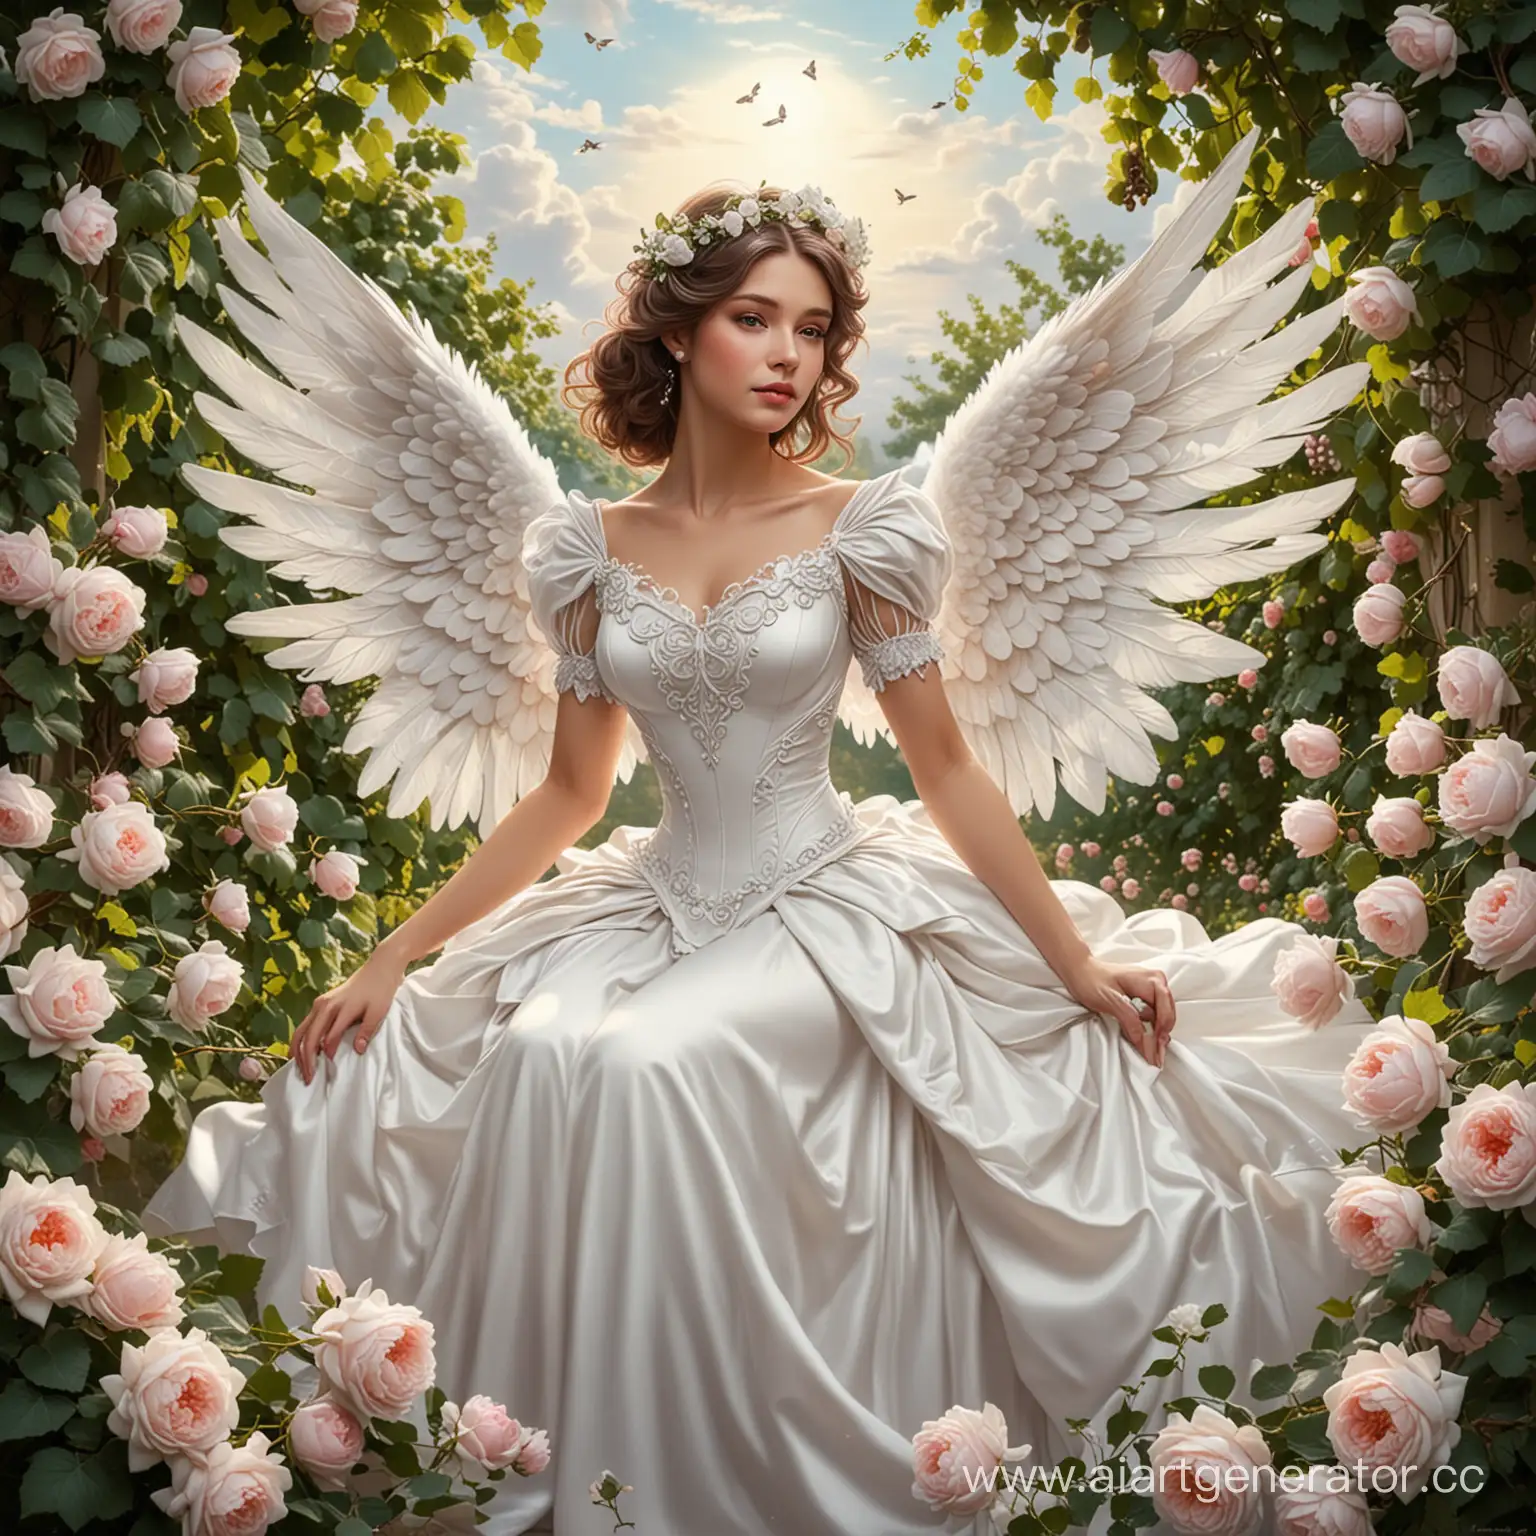 draw a picture in the style of Alphonse the Fly angel girl with white wings in a white ball gown surrounded by roses of grapes